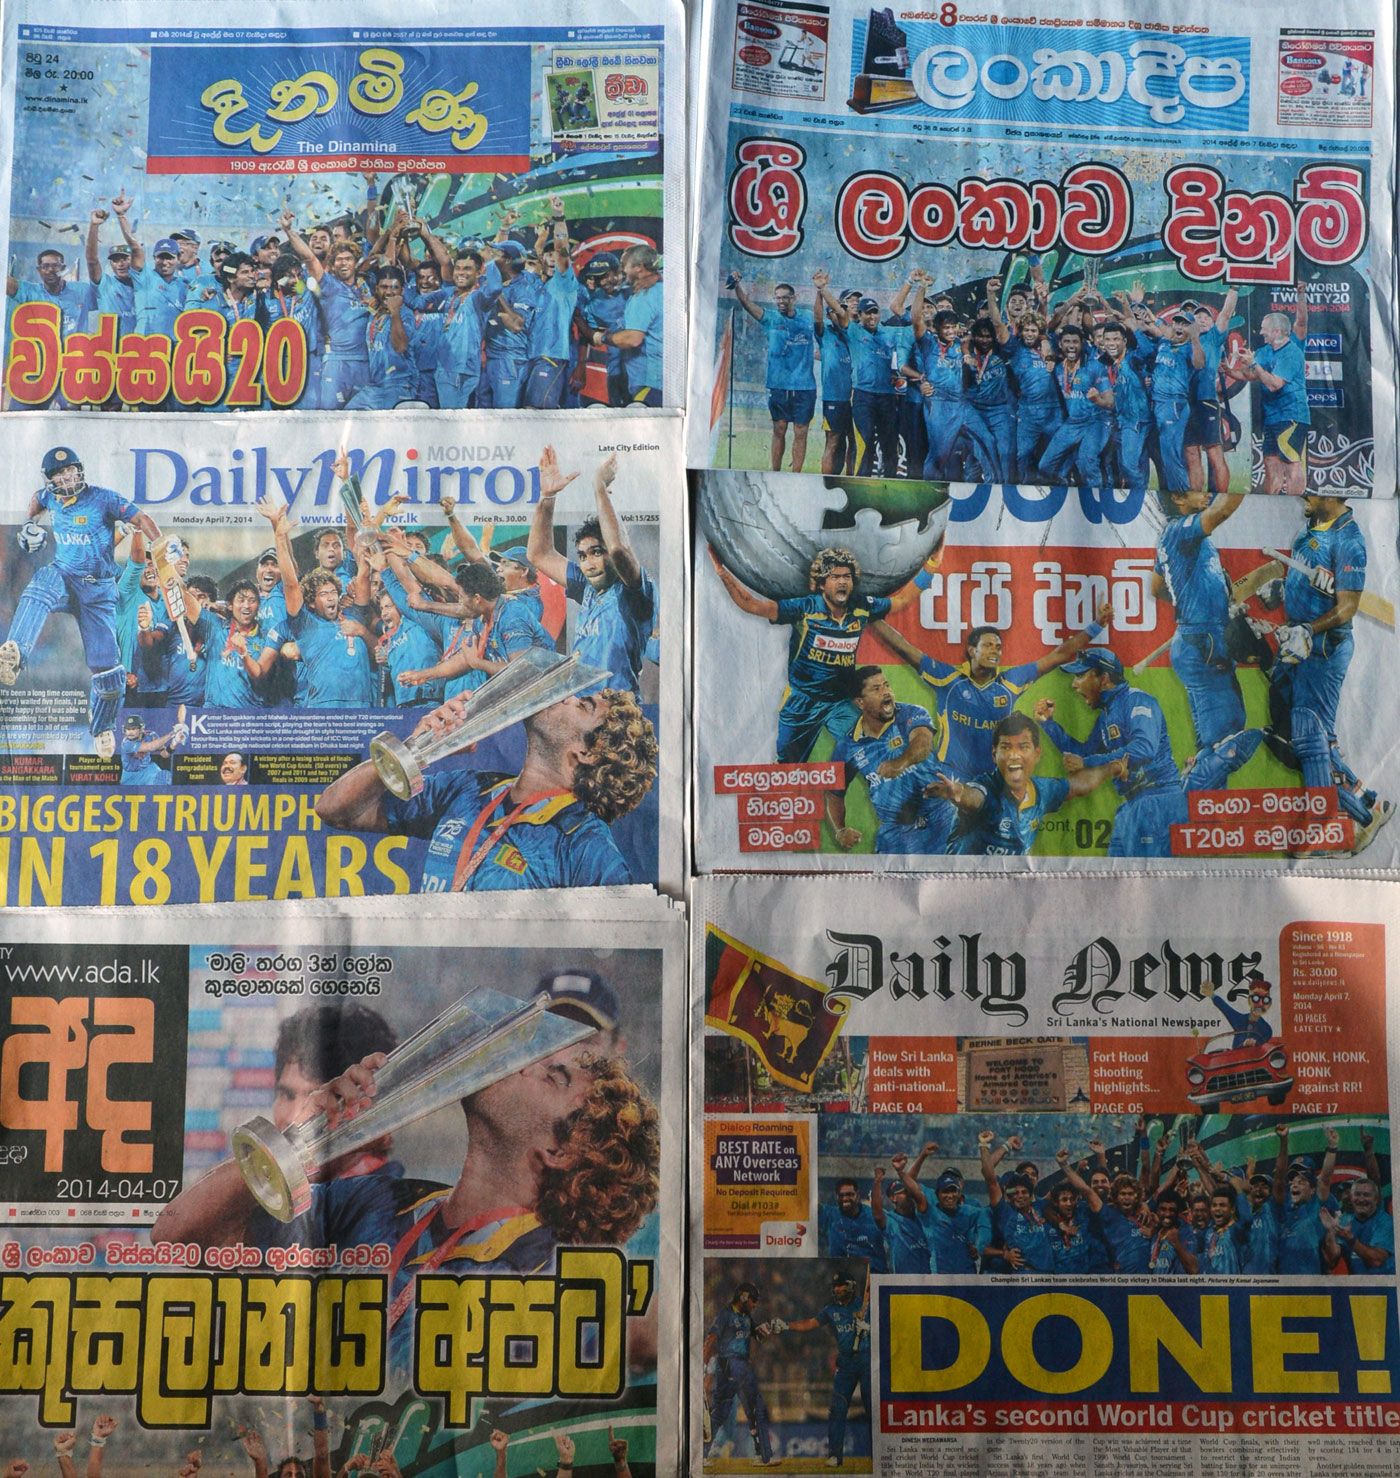 The headlines in Sri Lanka's newspapers a day after the World T20 ...